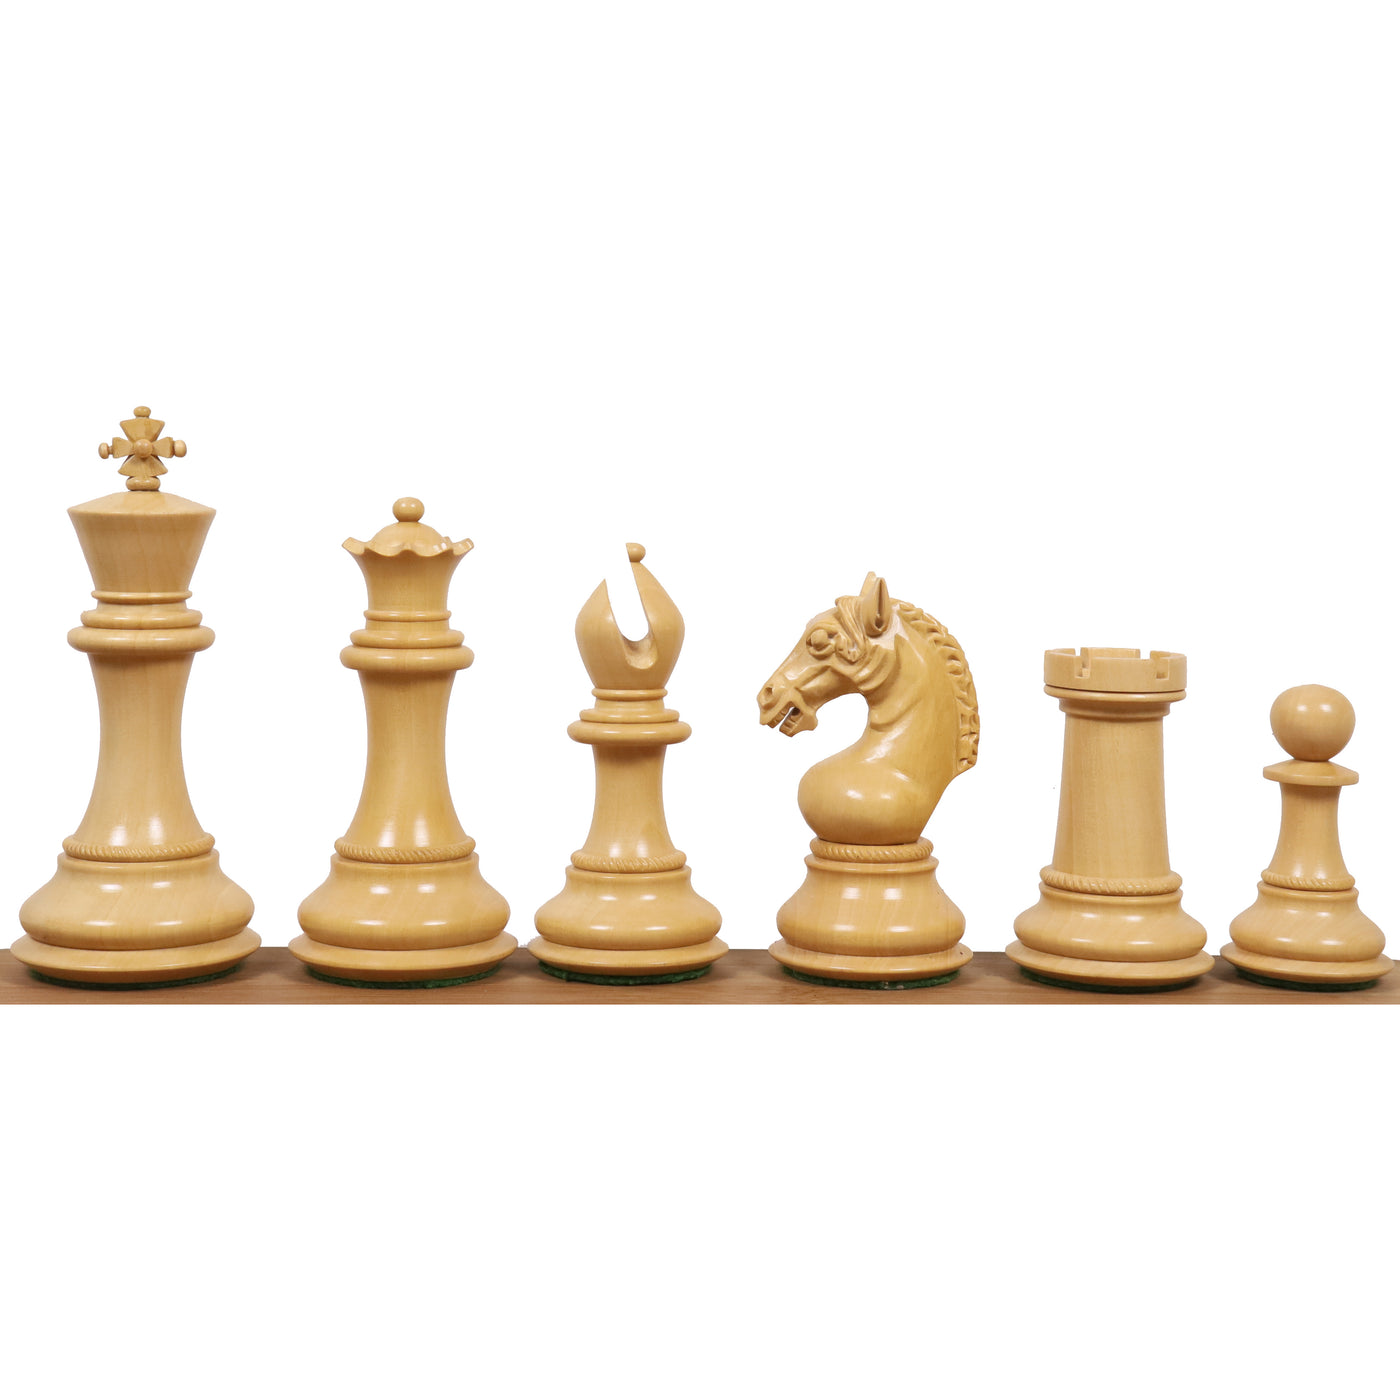 Combo of 4.5" Sheffield Staunton Luxury Chess Ebony Wood Pieces with Board and Storage Box